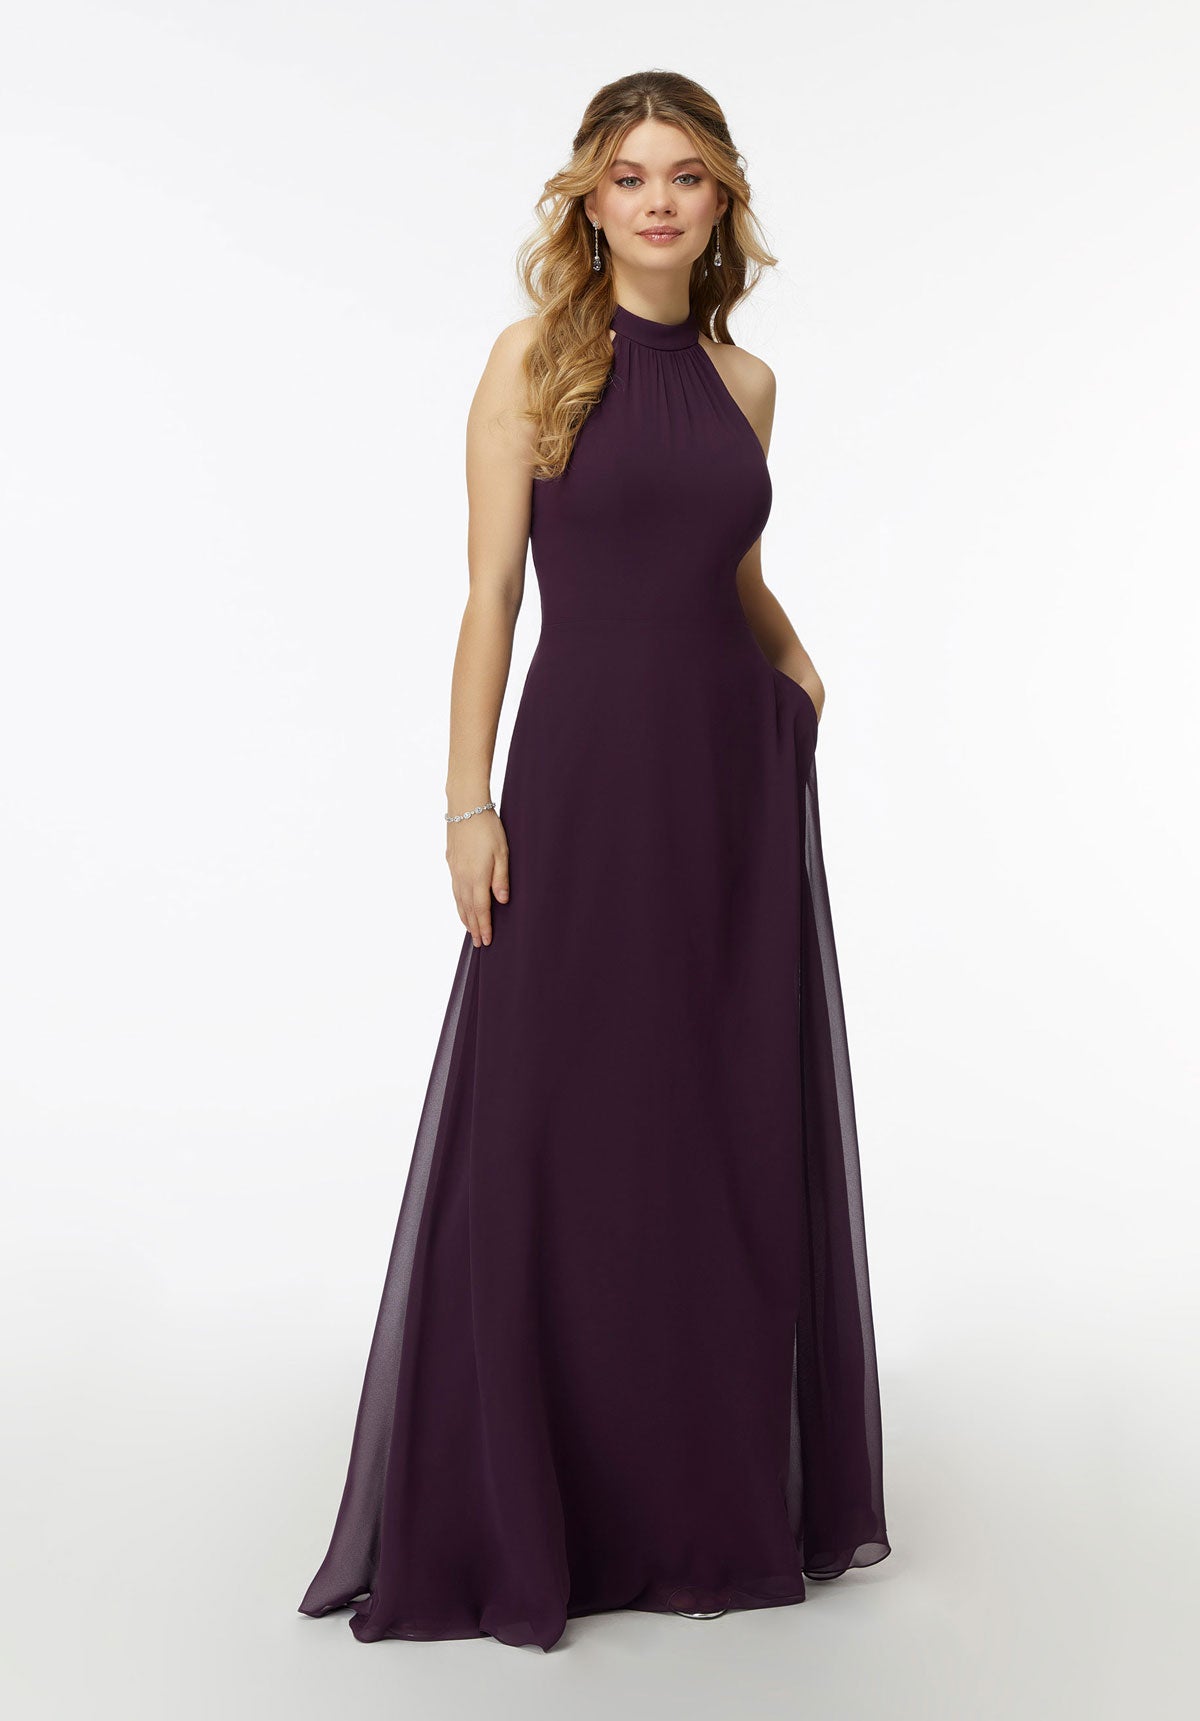 Morilee - 21737 - Cheron's Bridal, Bridesmaids Dress - Morilee - - Wedding Gowns Dresses Chattanooga Hixson Shops Boutiques Tennessee TN Georgia GA MSRP Lowest Prices Sale Discount